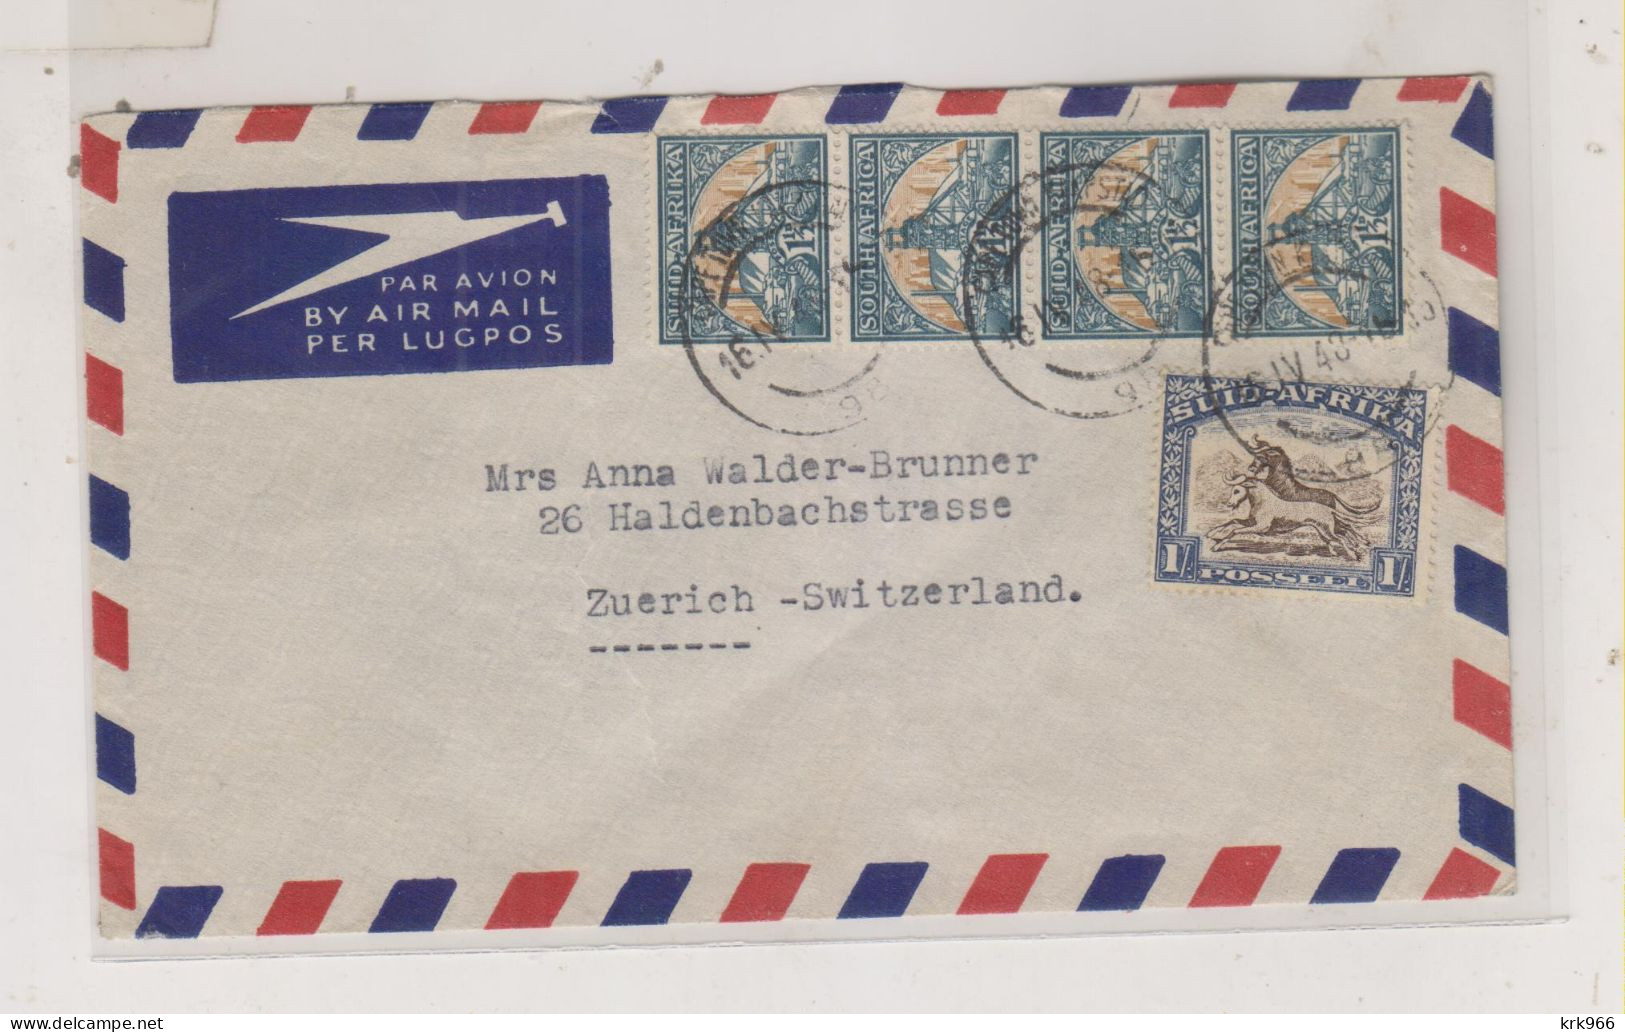 SOUTH AFRICA 1948 CAPE TOWN Nice  Airmail Cover To Switzerland - Airmail